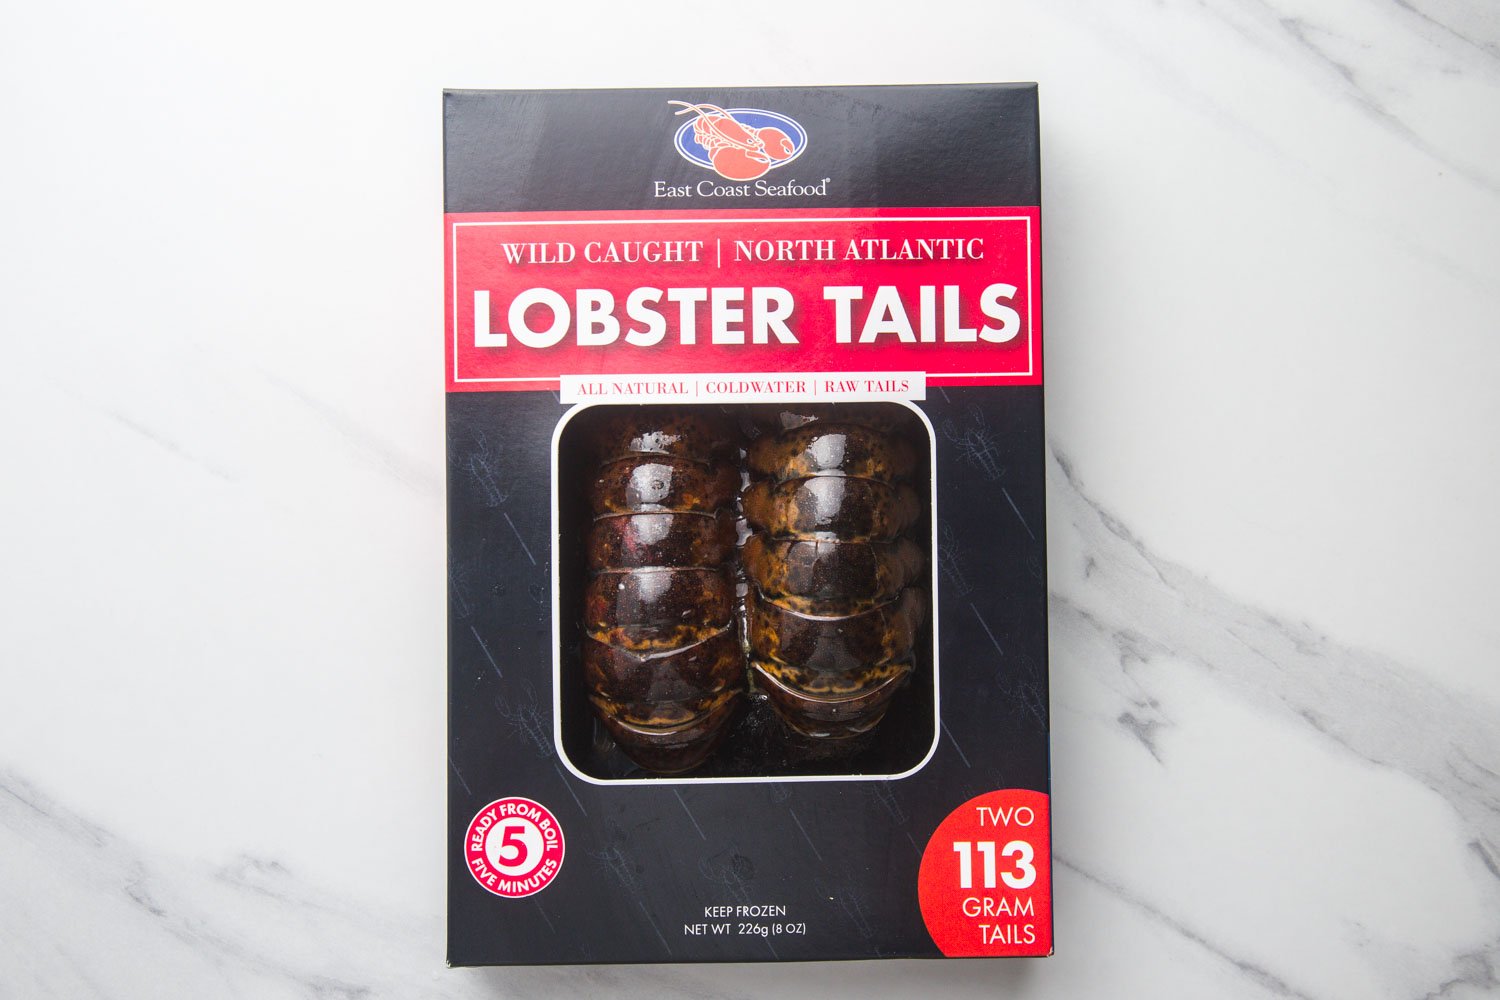 2 lobster tails packaged